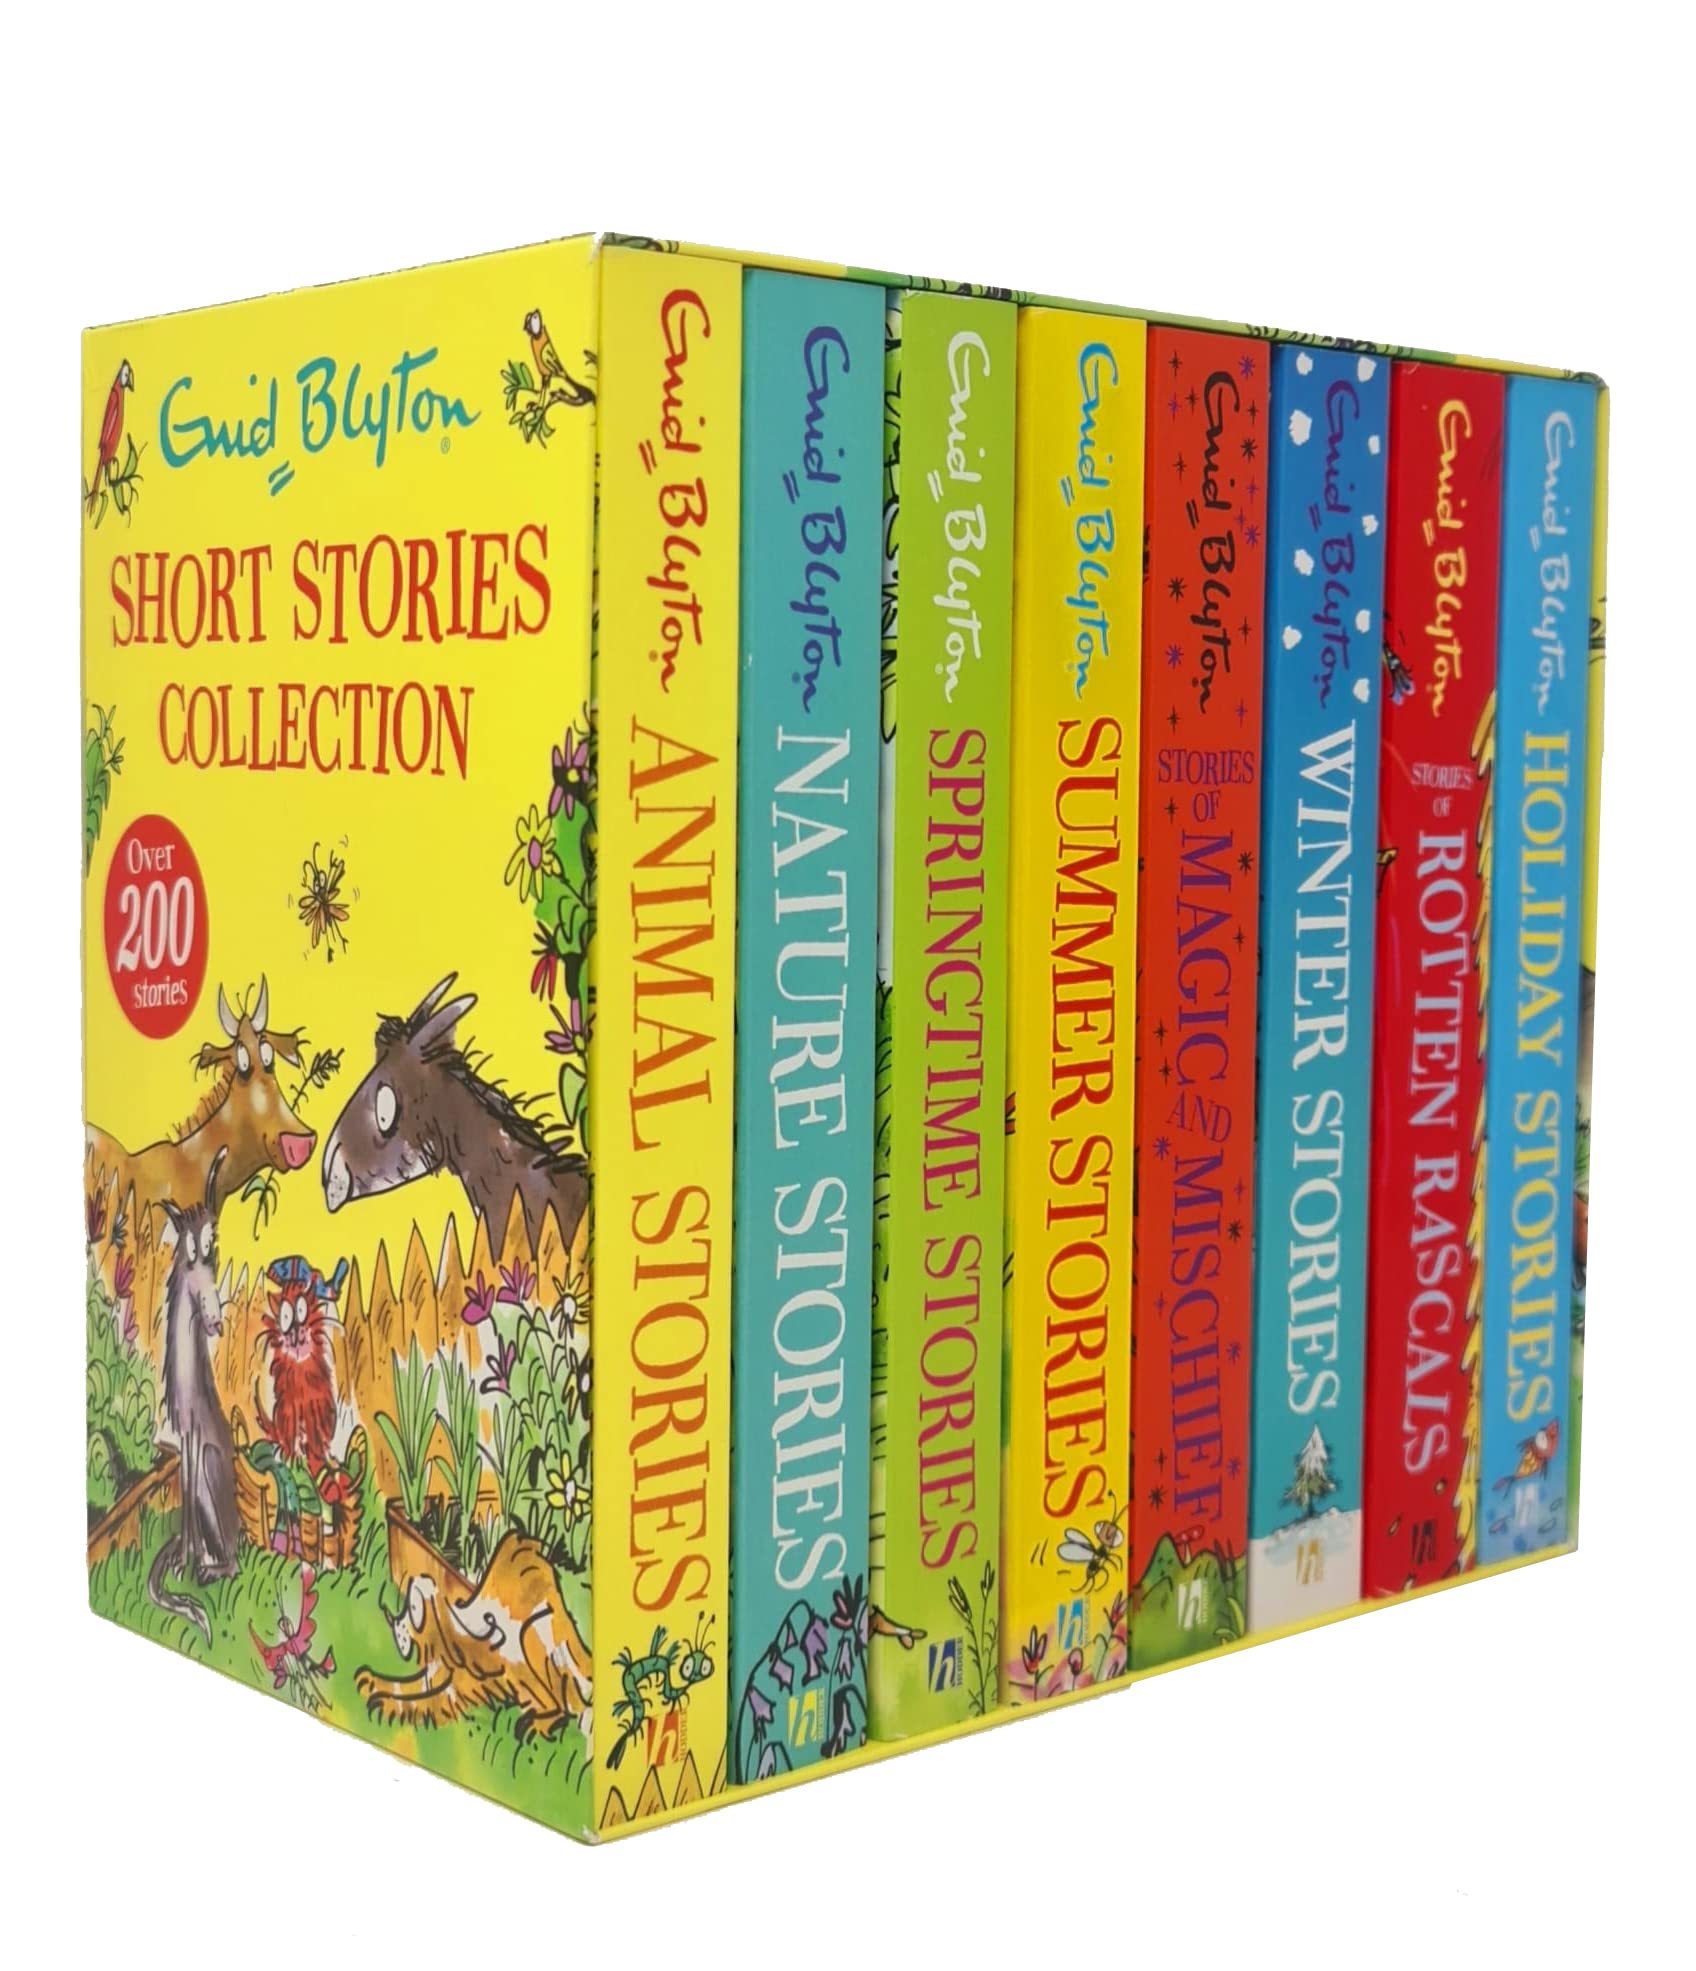 Bumper Short Story Collection 8 Books Box Set Including Over 200 Stories